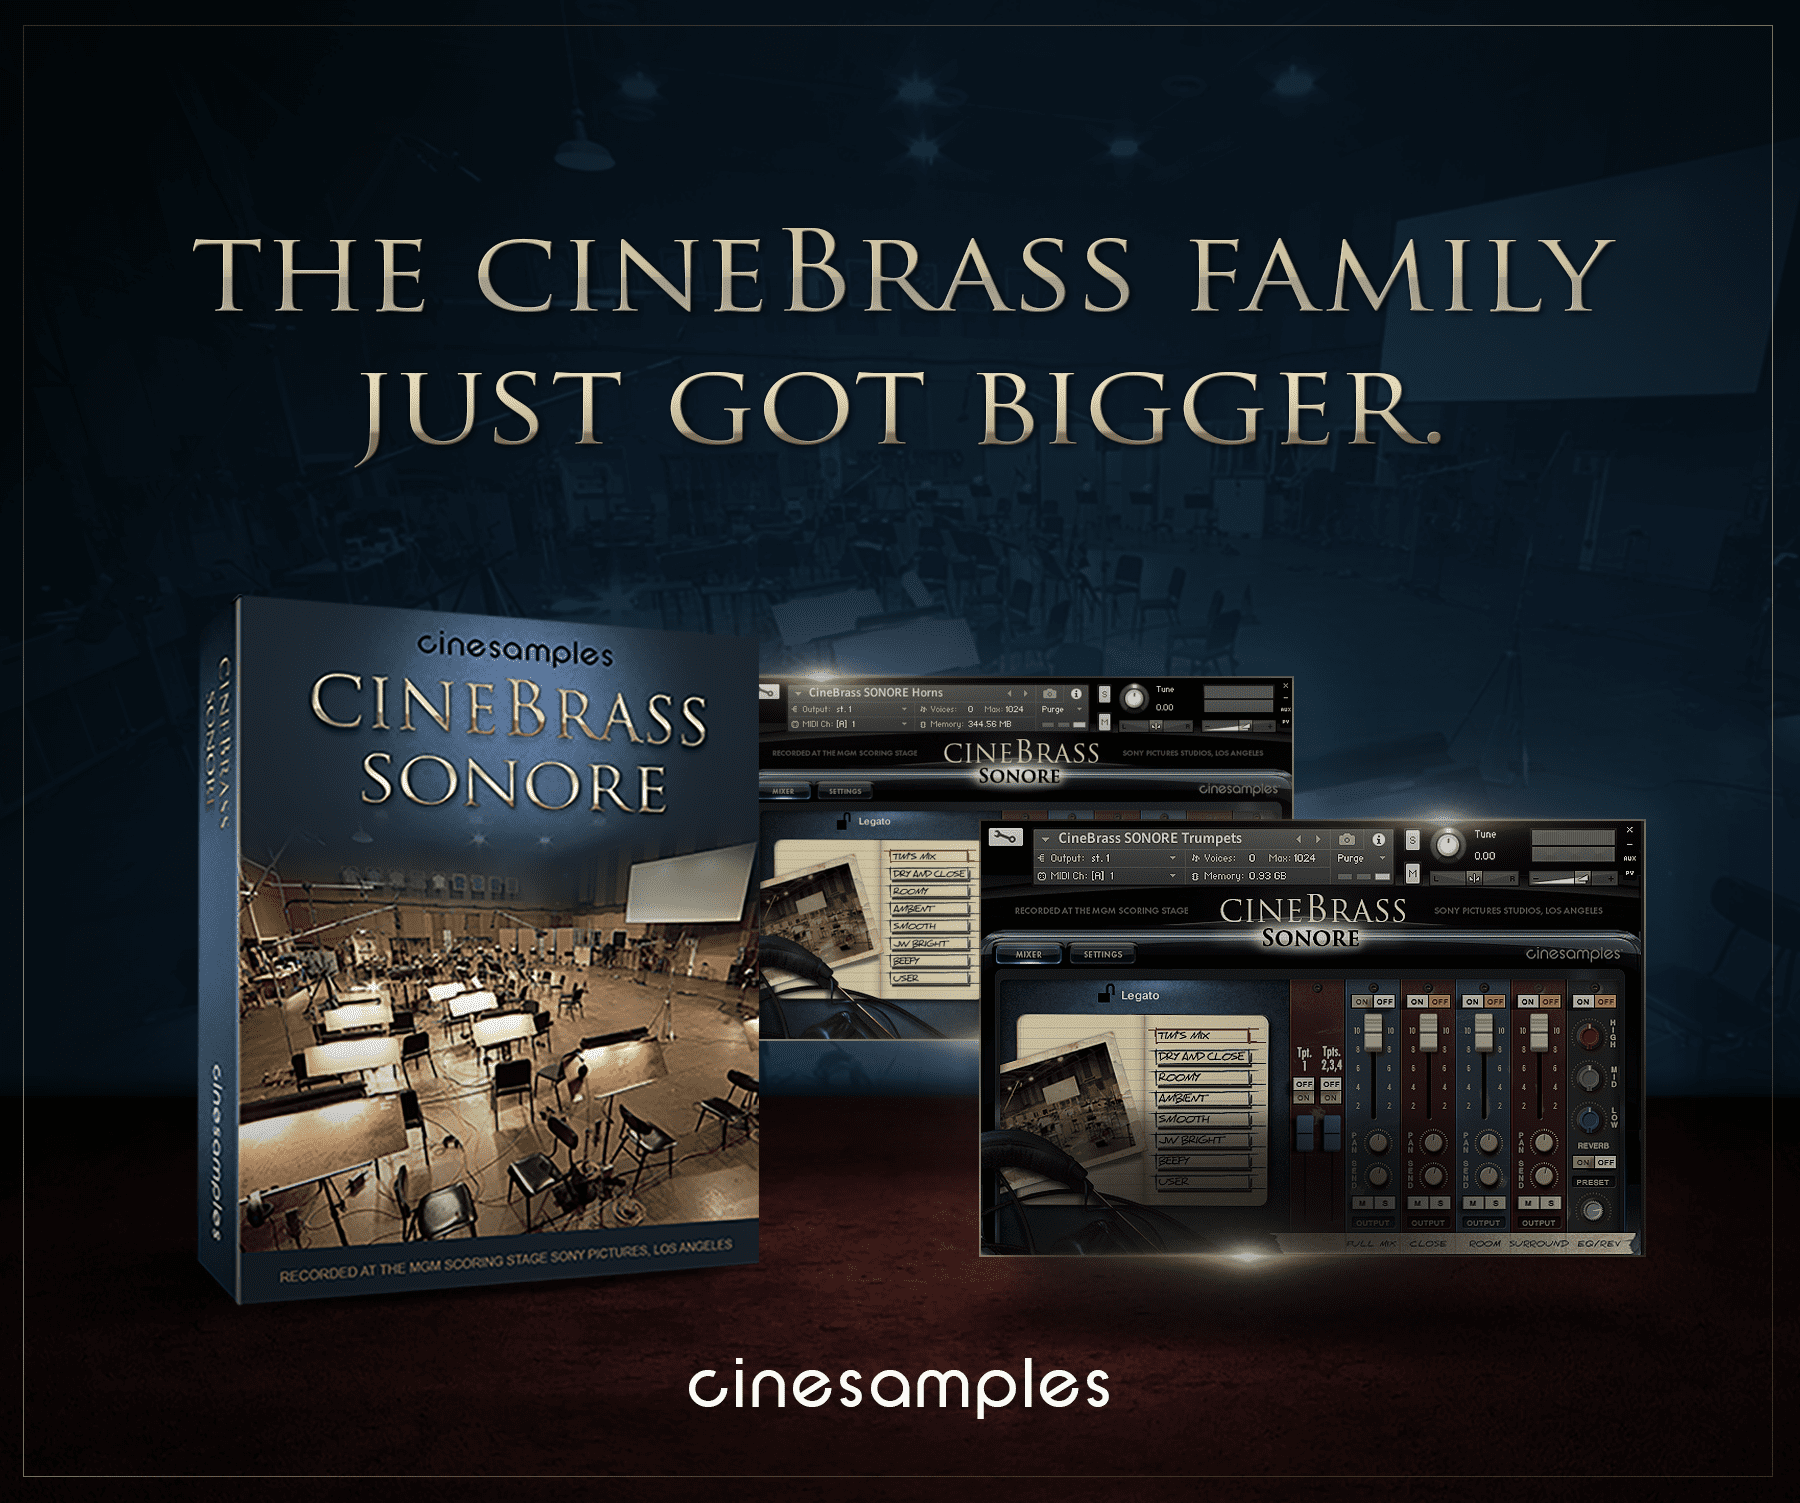 CineBrass Sonore is Officially Out Today